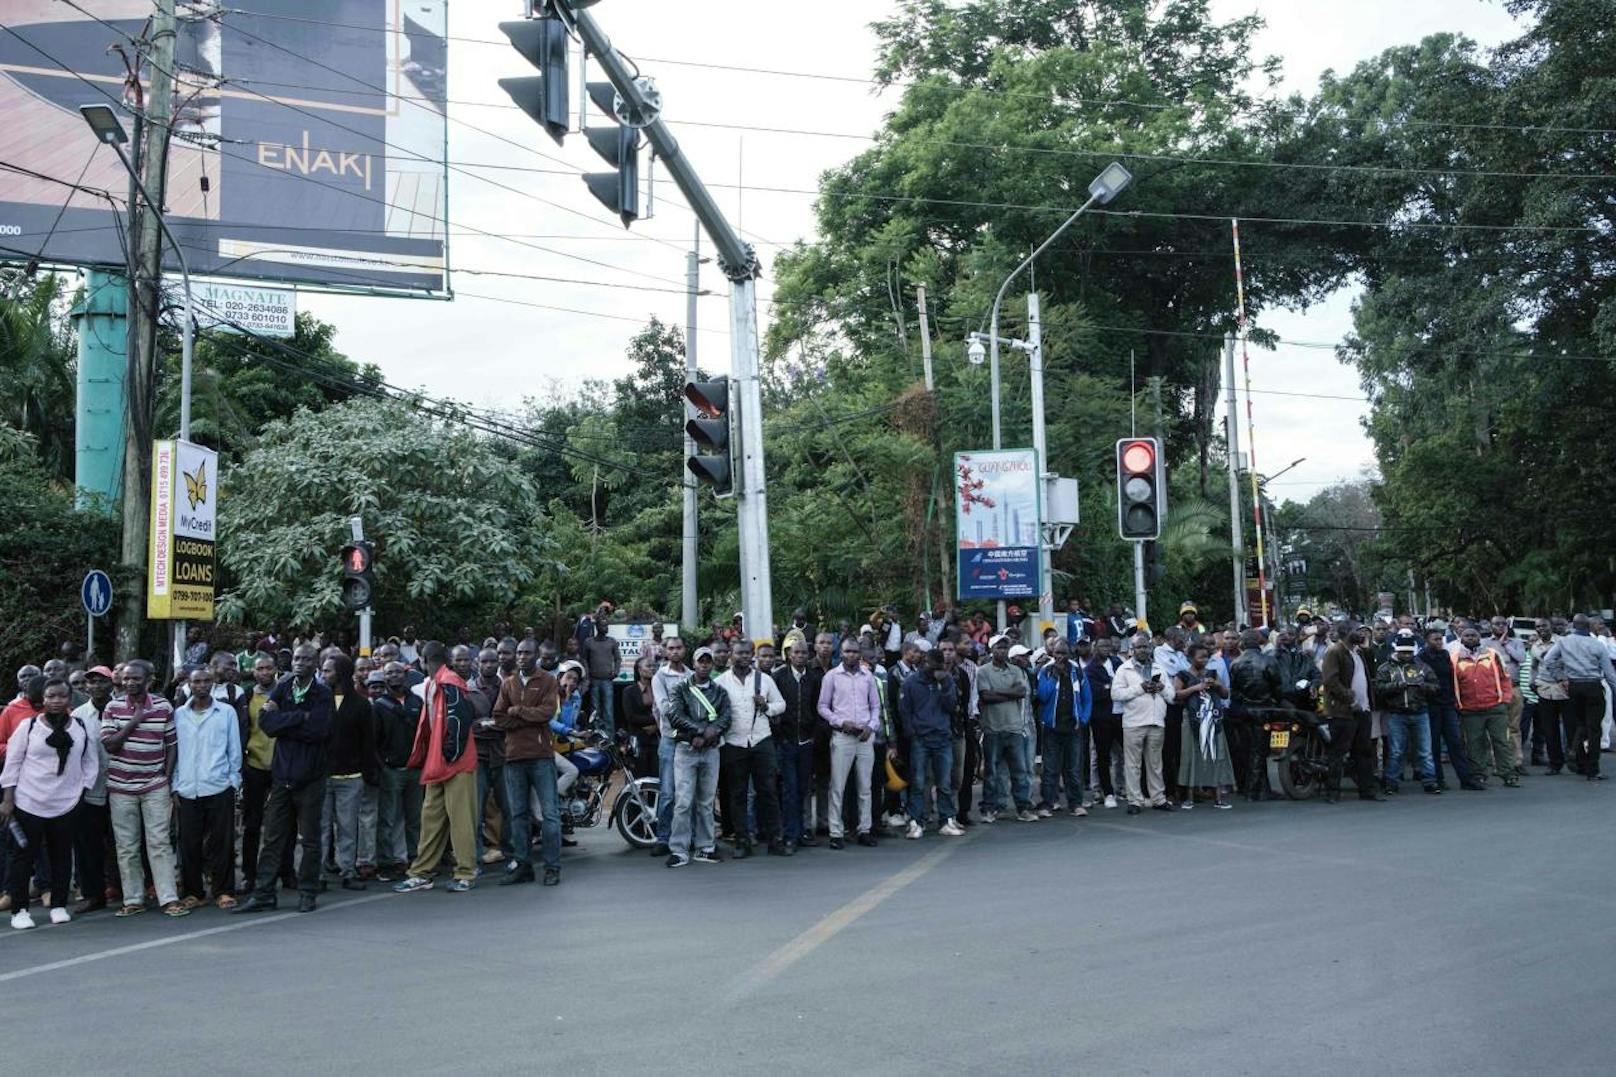 Download von www.picturedesk.com am 16.01.2019 (06:05). 
People gather at a road block point settled by the police after a blast followed by a gun battle rocked a upmarket hotel complex in Nairobi on January 15, 2019. - At least five people were killed on January 15 when an Islamist suicide bomber and gunmen stormed an upmarket hotel complex in Nairobi, in the first such attack in the Kenyan capital in five years. (Photo by Yasuyoshi CHIBA / AFP) - 20190115_PD8489 - Rechteinfo: Nur für redaktionelle Nutzung! - Editorial Use Only! Werbliche Nutzung nur nach Freigabe!